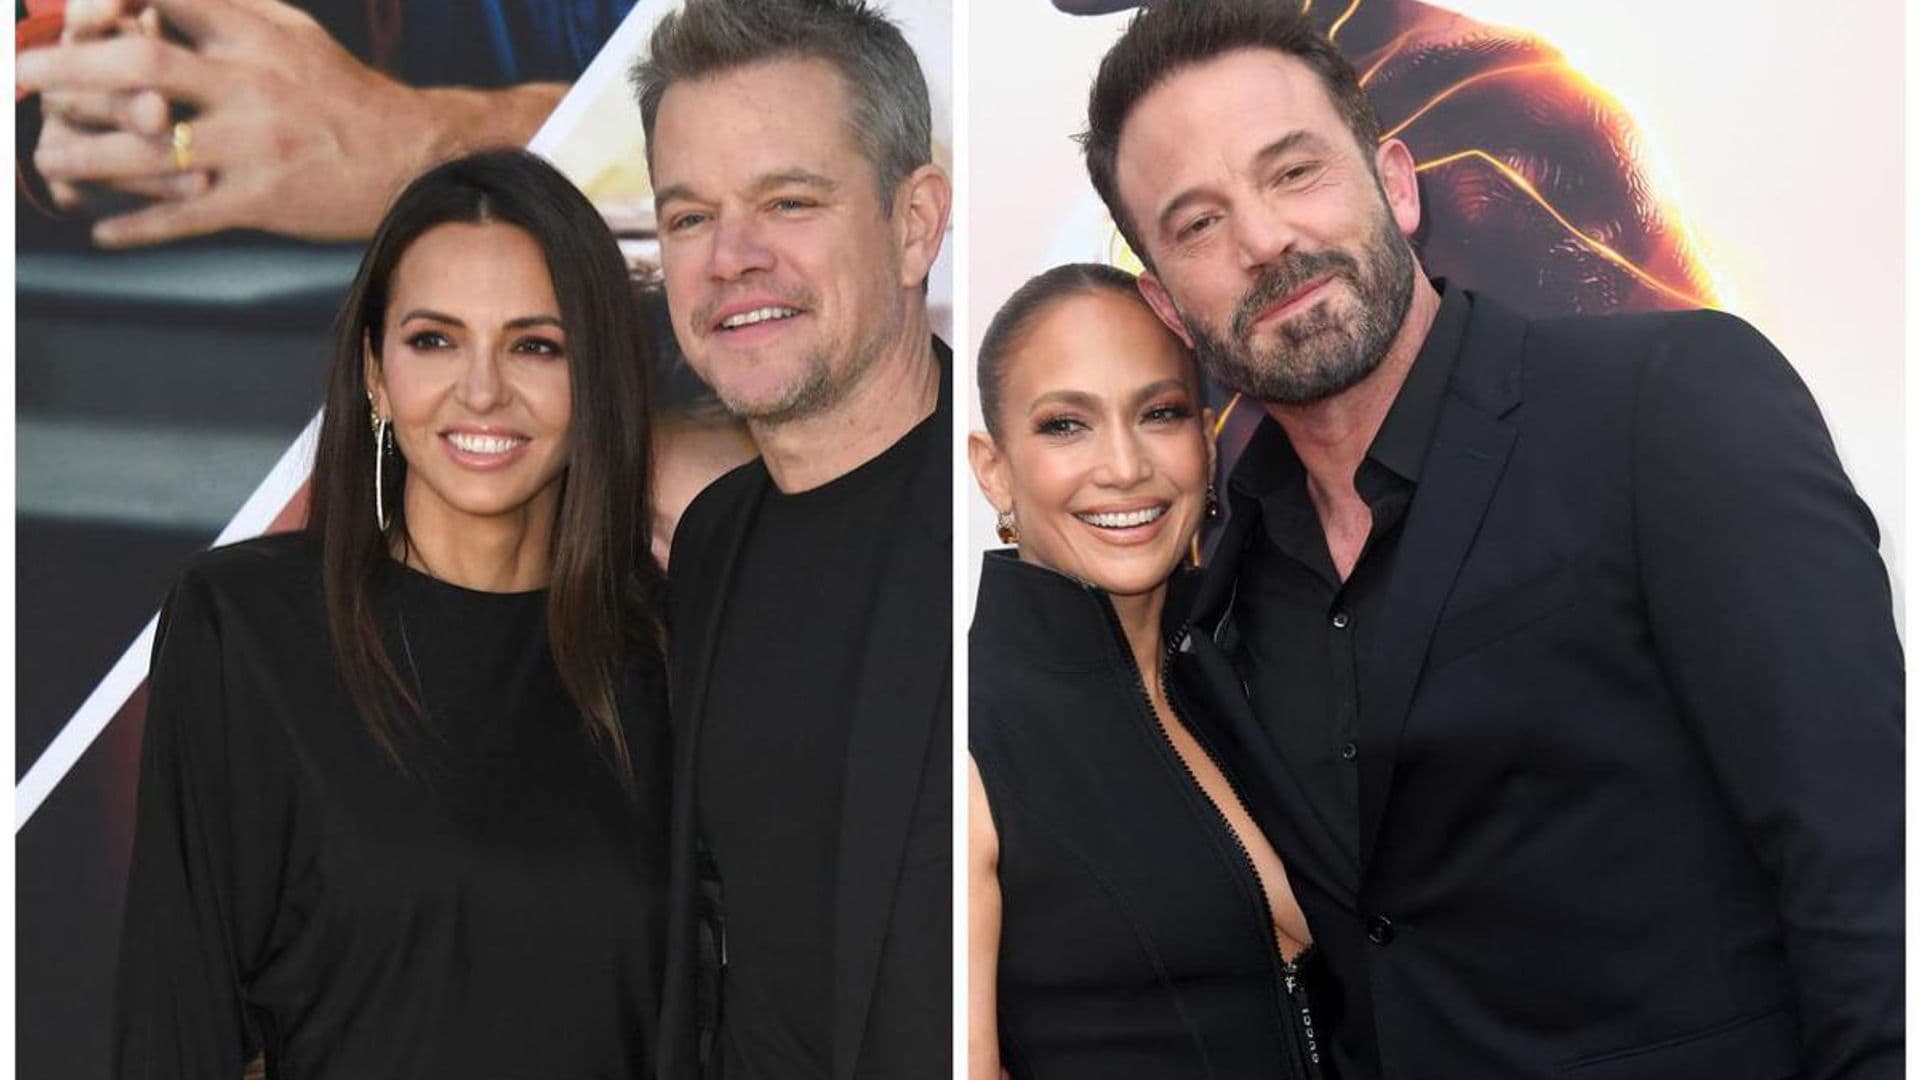 How Ben Affleck and Jennifer Lopez helped ‘save’ Matt Damon marriage with Luciana Barroso